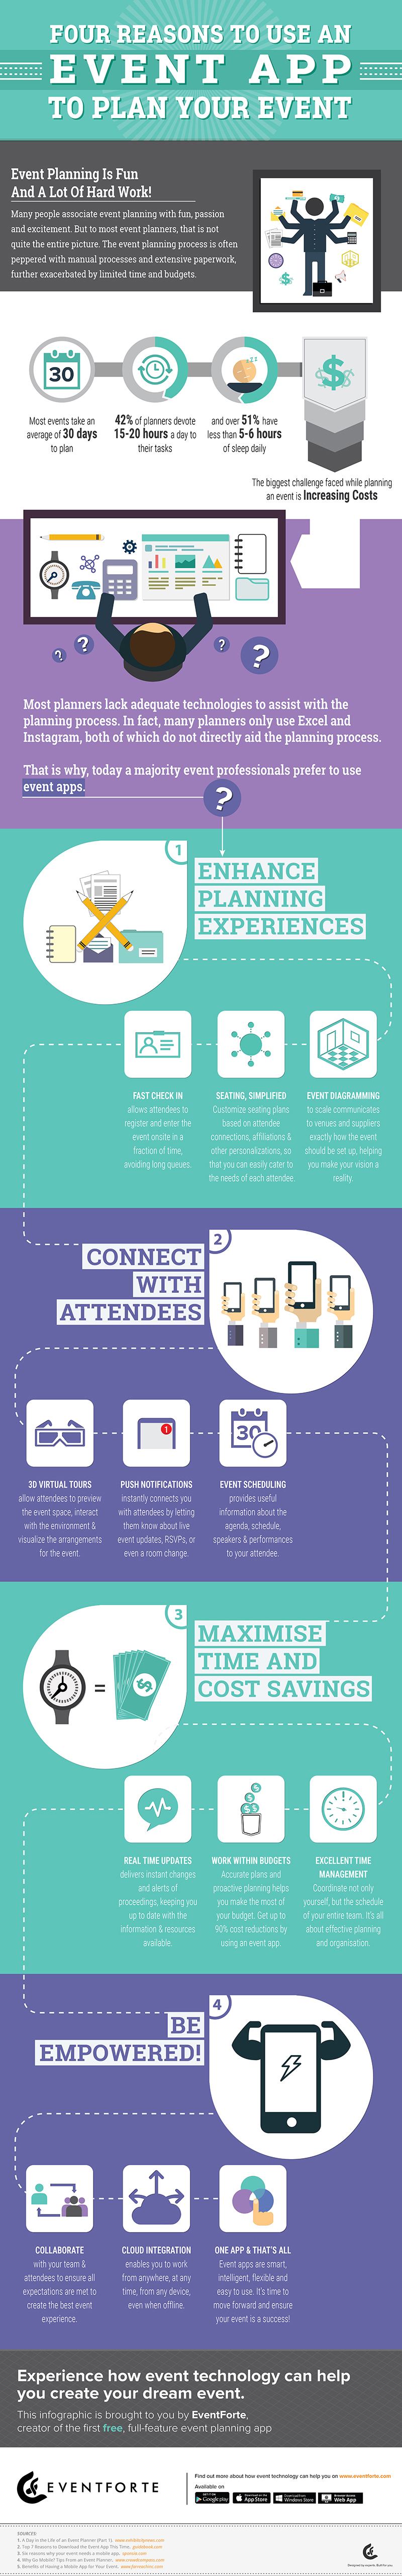 Four Reasons to Use An Event App And Check In App To Plan Your Event